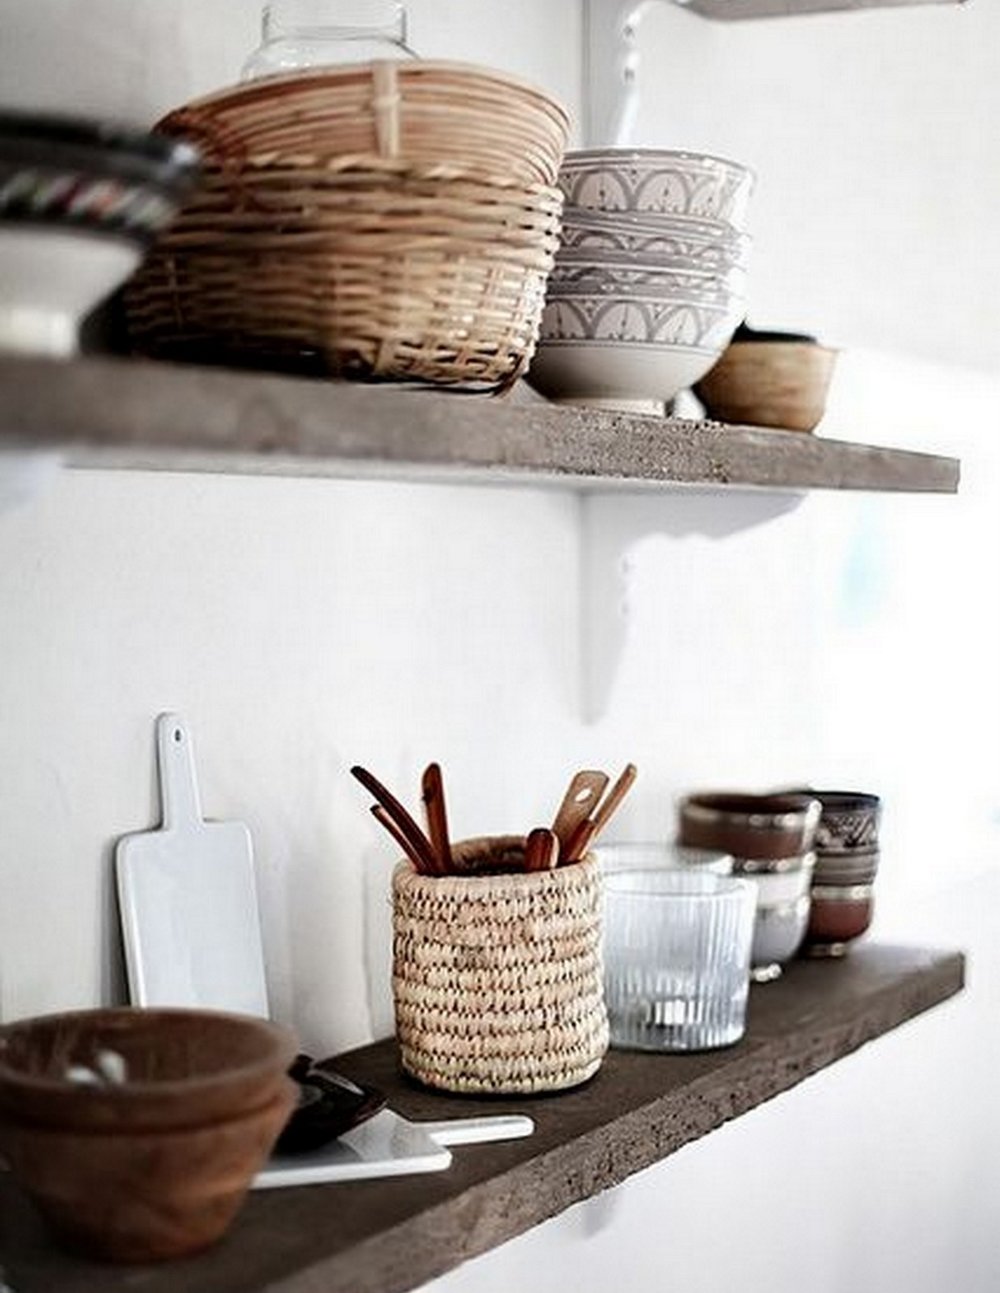 Rustic Shelves + Moroccan Pottery